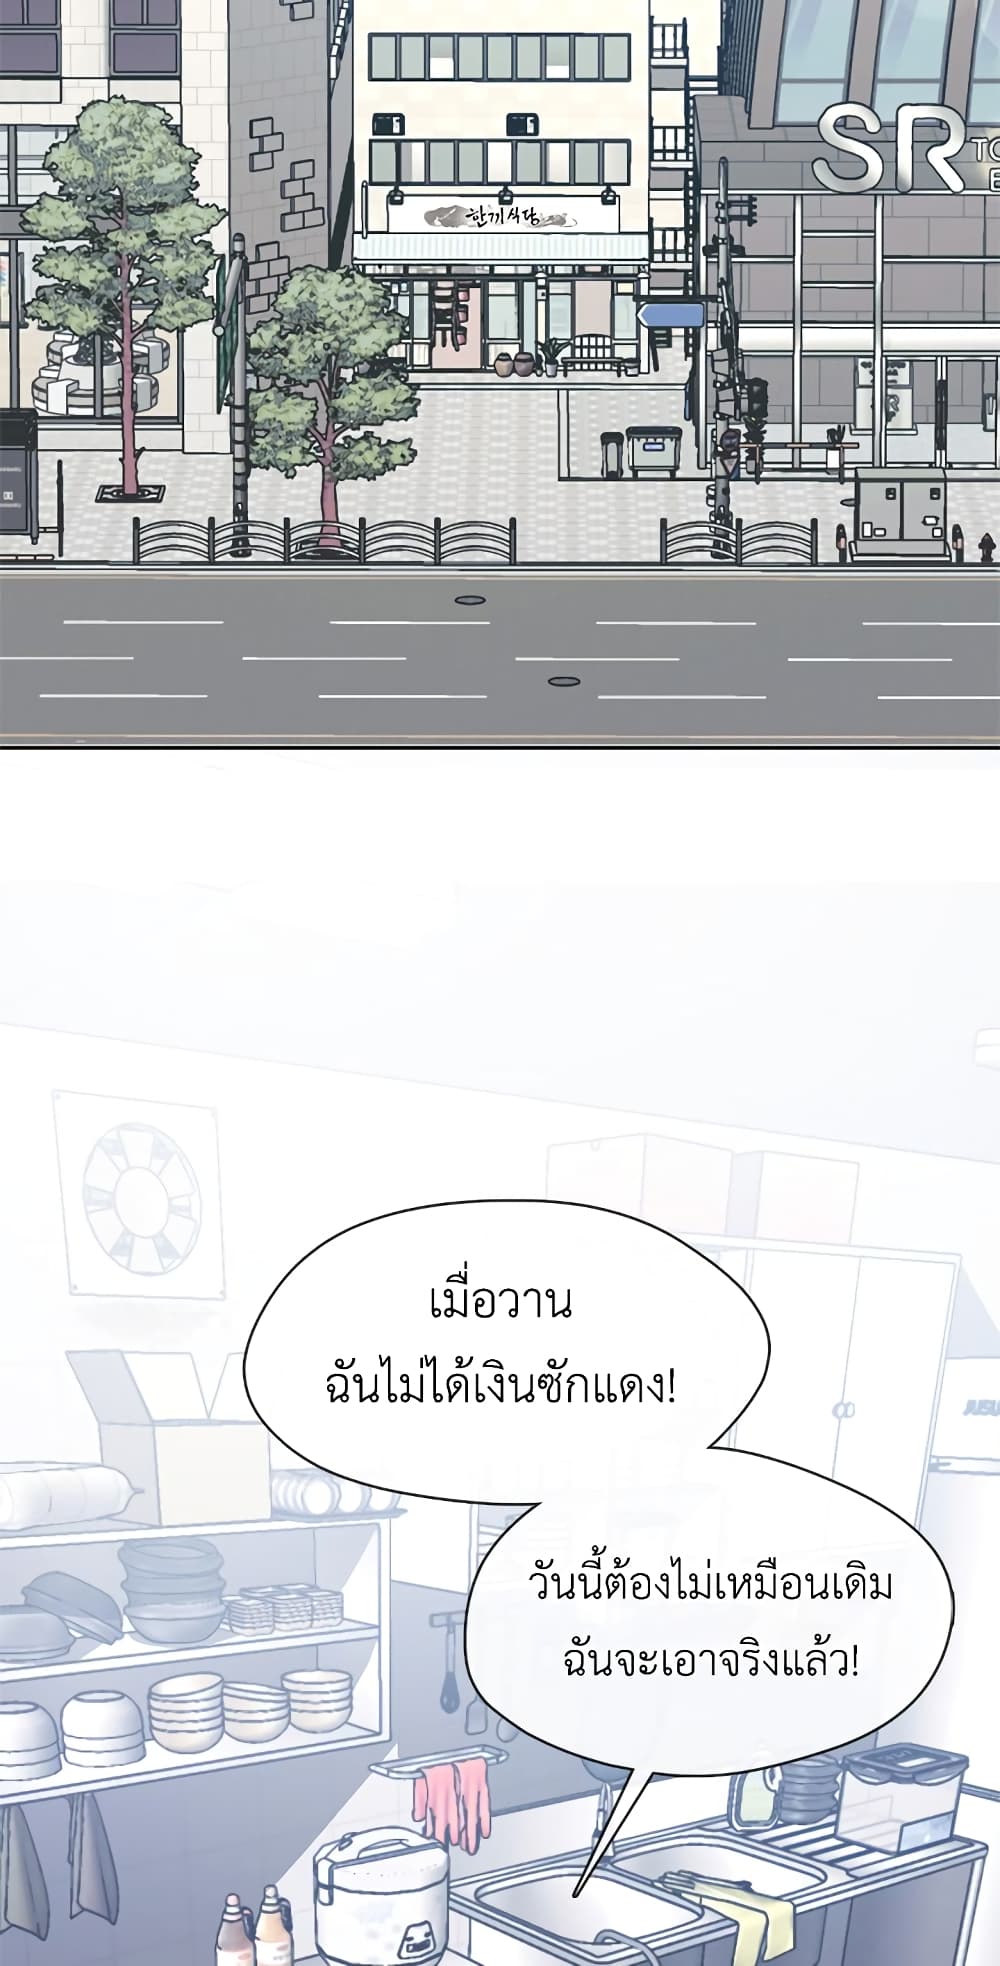 Restaurant in the After Life ตอนที่ 3 (3)